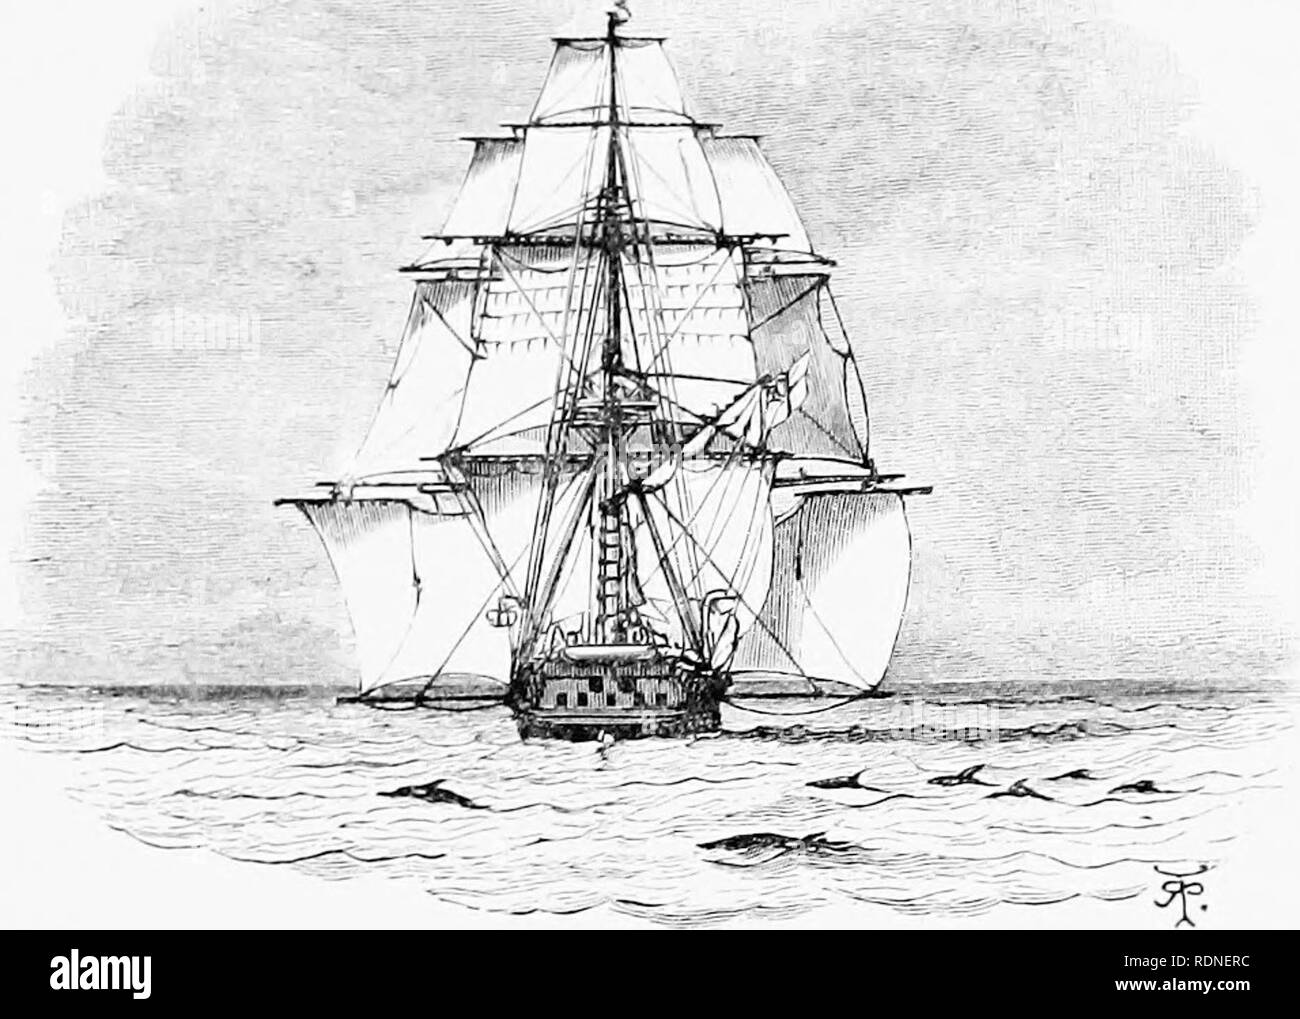 . Journal of researches into the natural history and geology of the countries visited during the voyage round the world of H.M.S. &quot;Beagle&quot; under the command of Captain Fitz Roy, R.N. Beagle Expedition (1831-1836); Natural history; Geology; Voyages around the world. SL.U-RRV 531 slaves ahmit thcii- condition ; they forget tliat tlie slave must iiulecil lie dull who does not calculate on the chance of liis answer reaciiing&quot; his master's ears. It is aryued that self-interest ill prevent excessive cruelty ; as if self-interest protected our domestic animals, which are far less lik Stock Photo